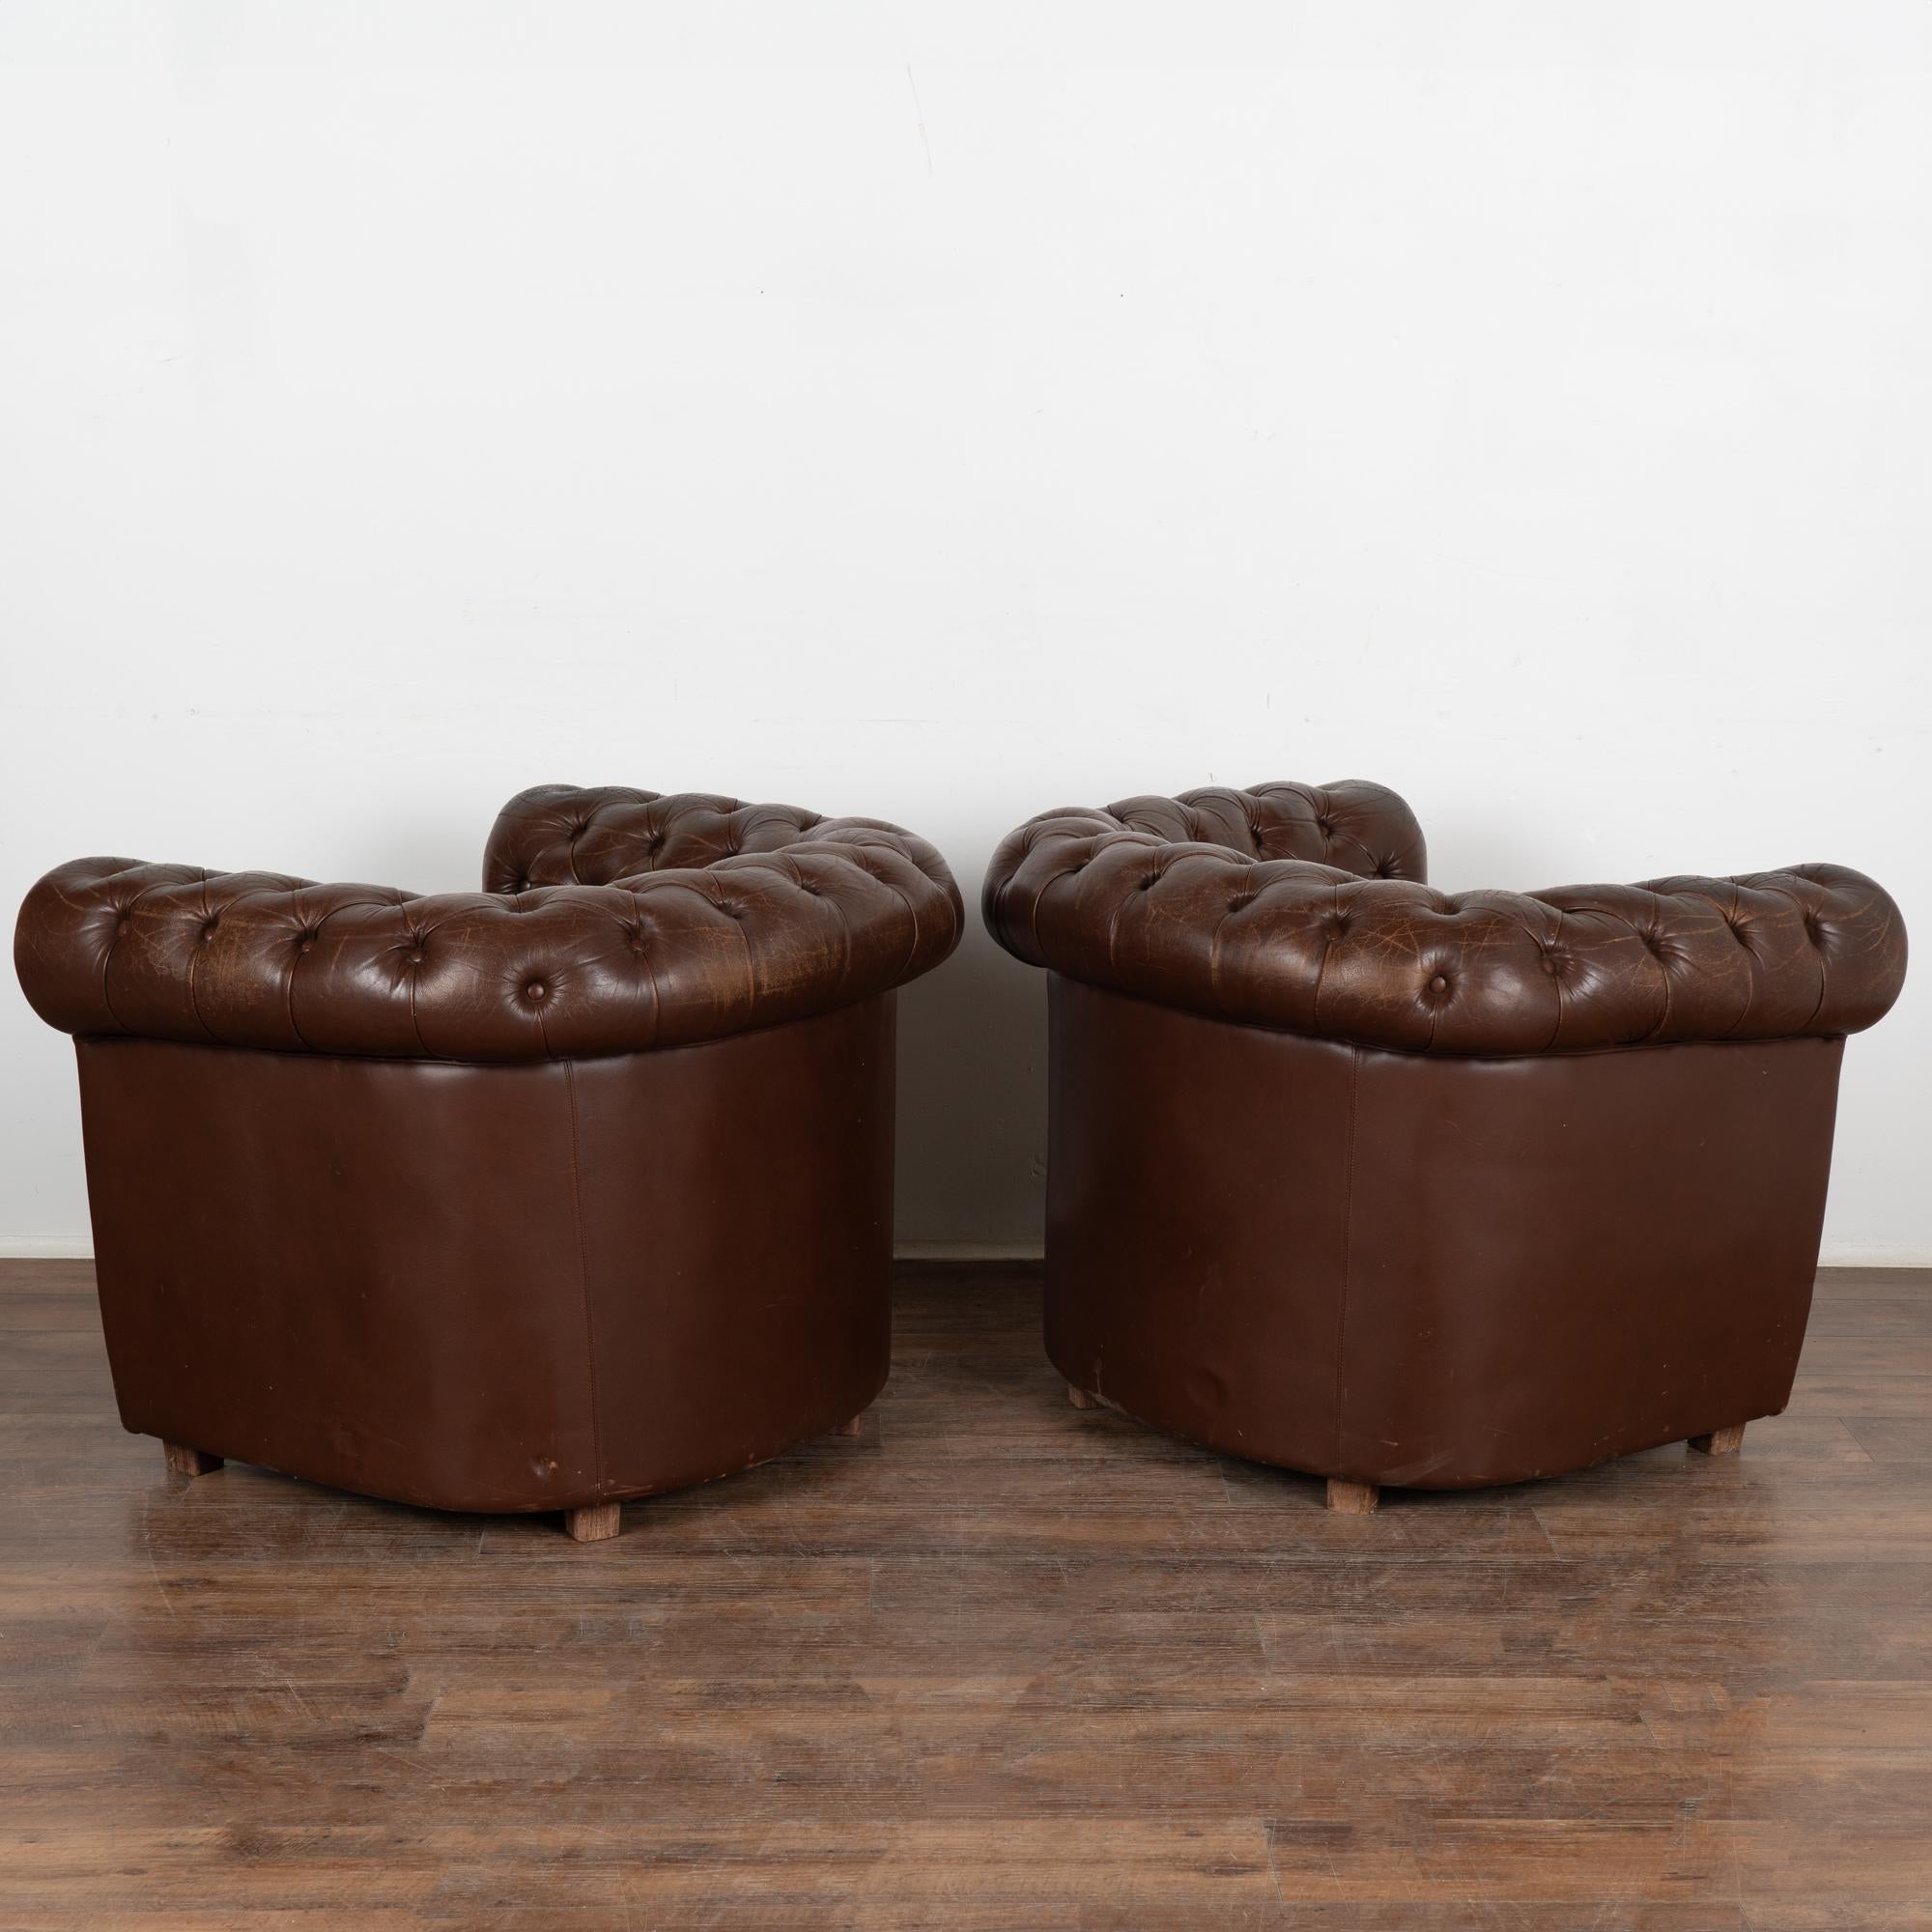 Chesterfield Style Brown Leather 3 Seat Sofa & 2 Club Chairs, circa 1920-40 For Sale 7